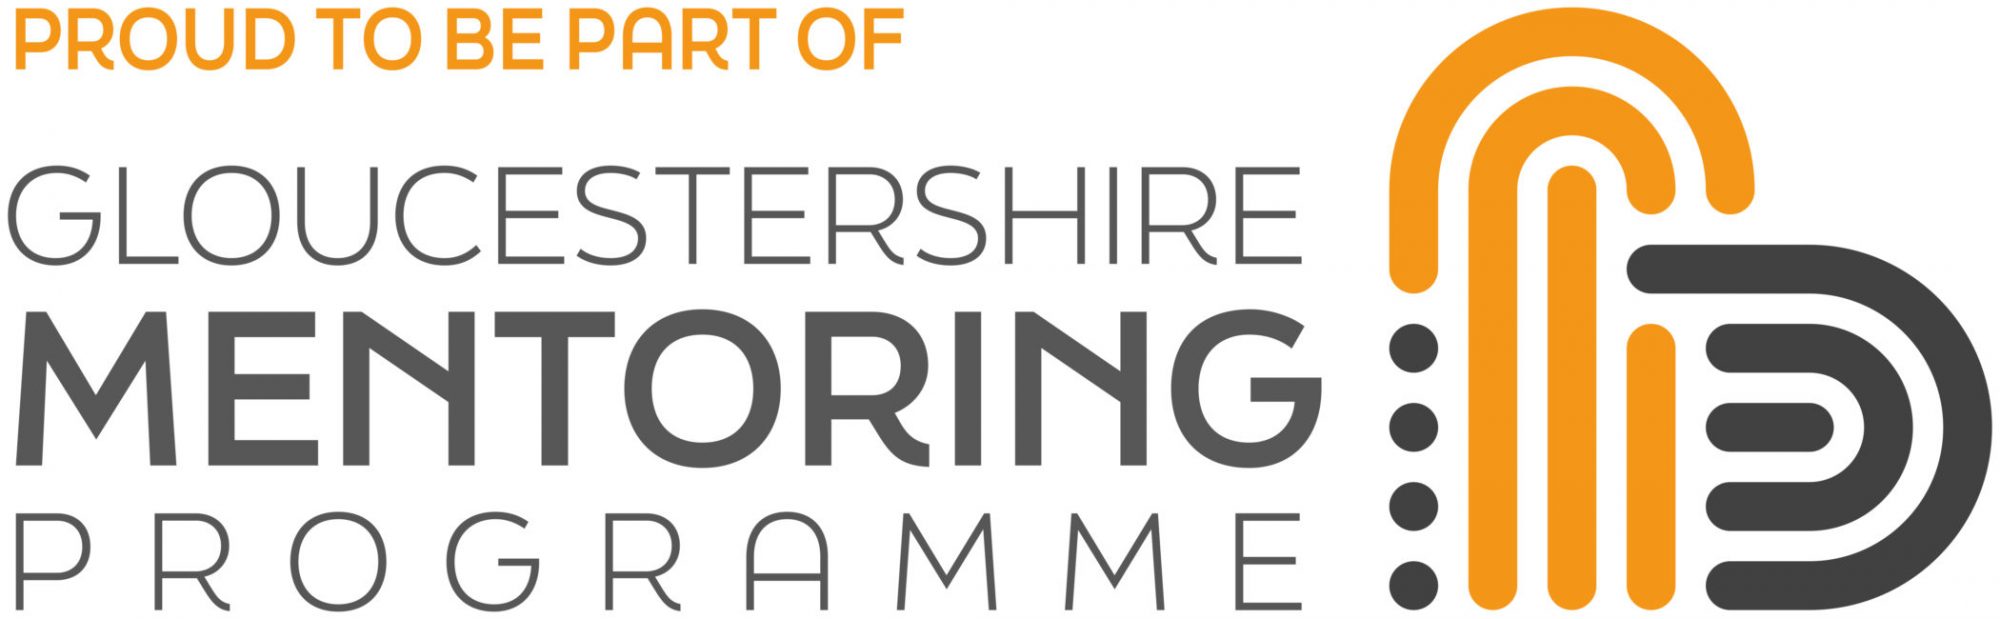 The Door, Proud to be part of the Gloucestershire Mentoring Programme